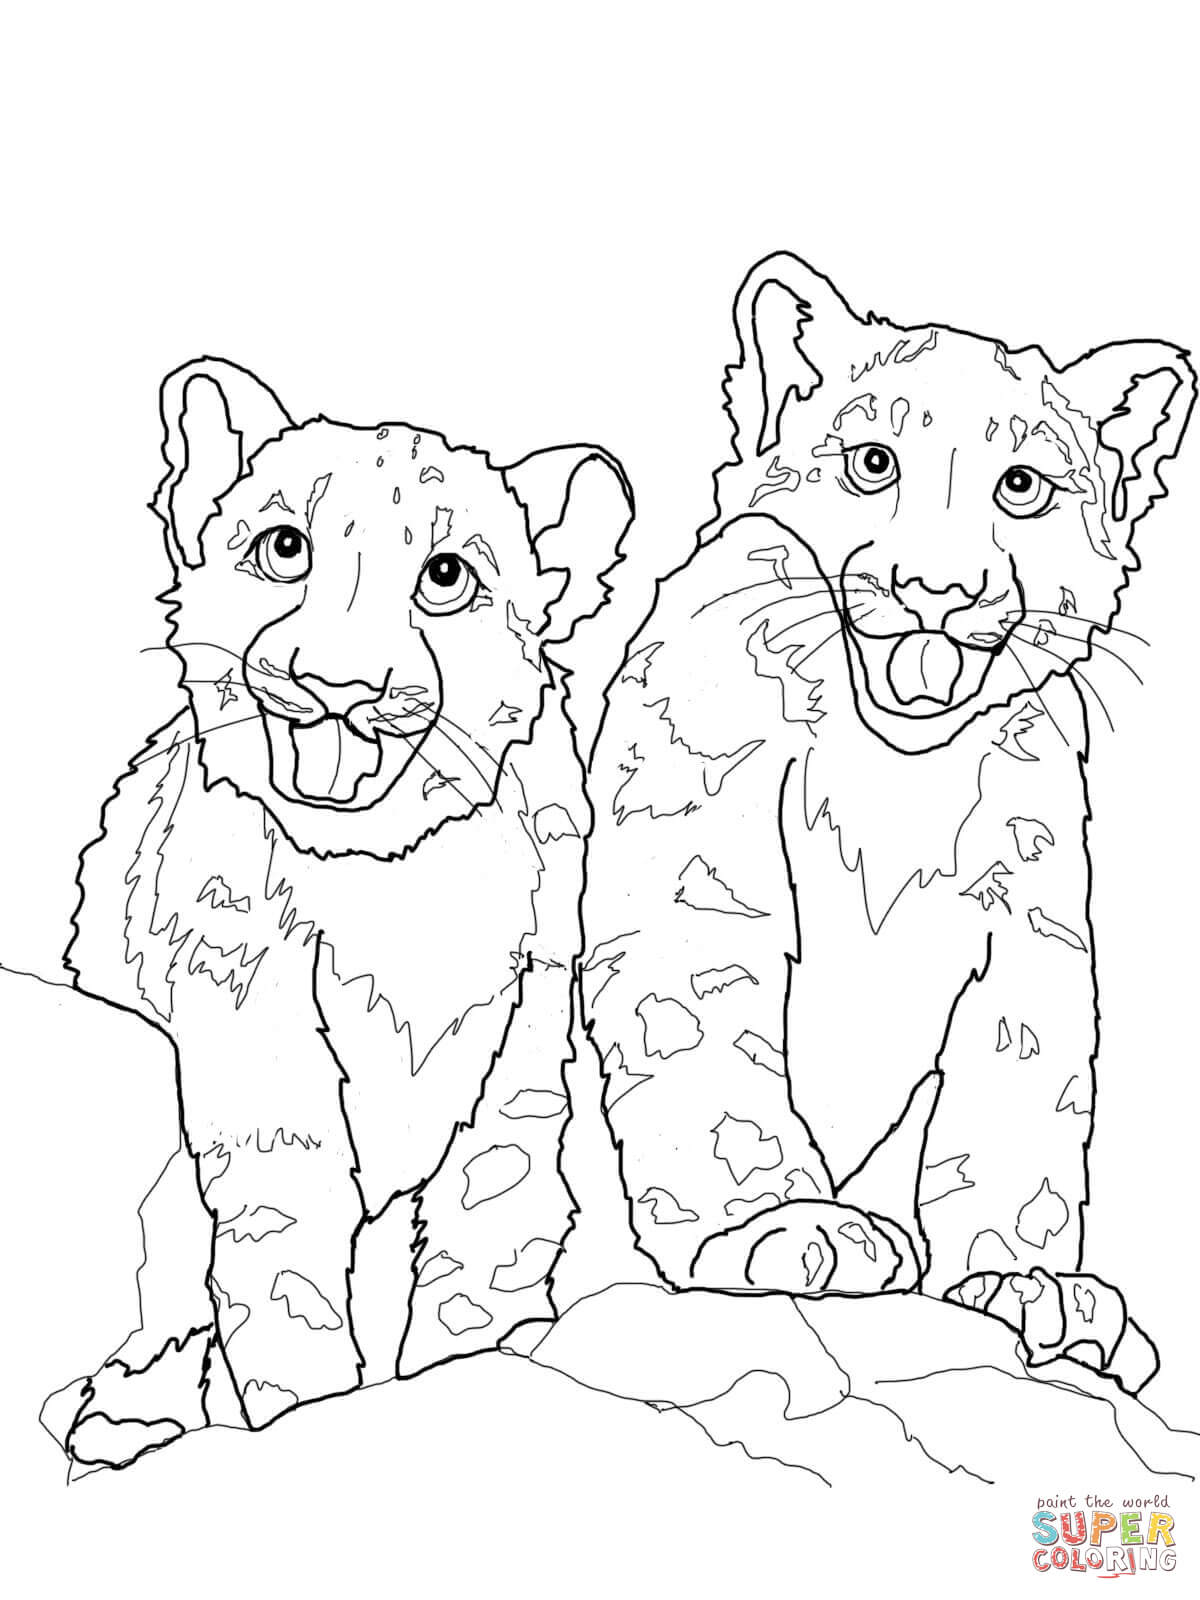 Snow Leopard coloring #19, Download drawings